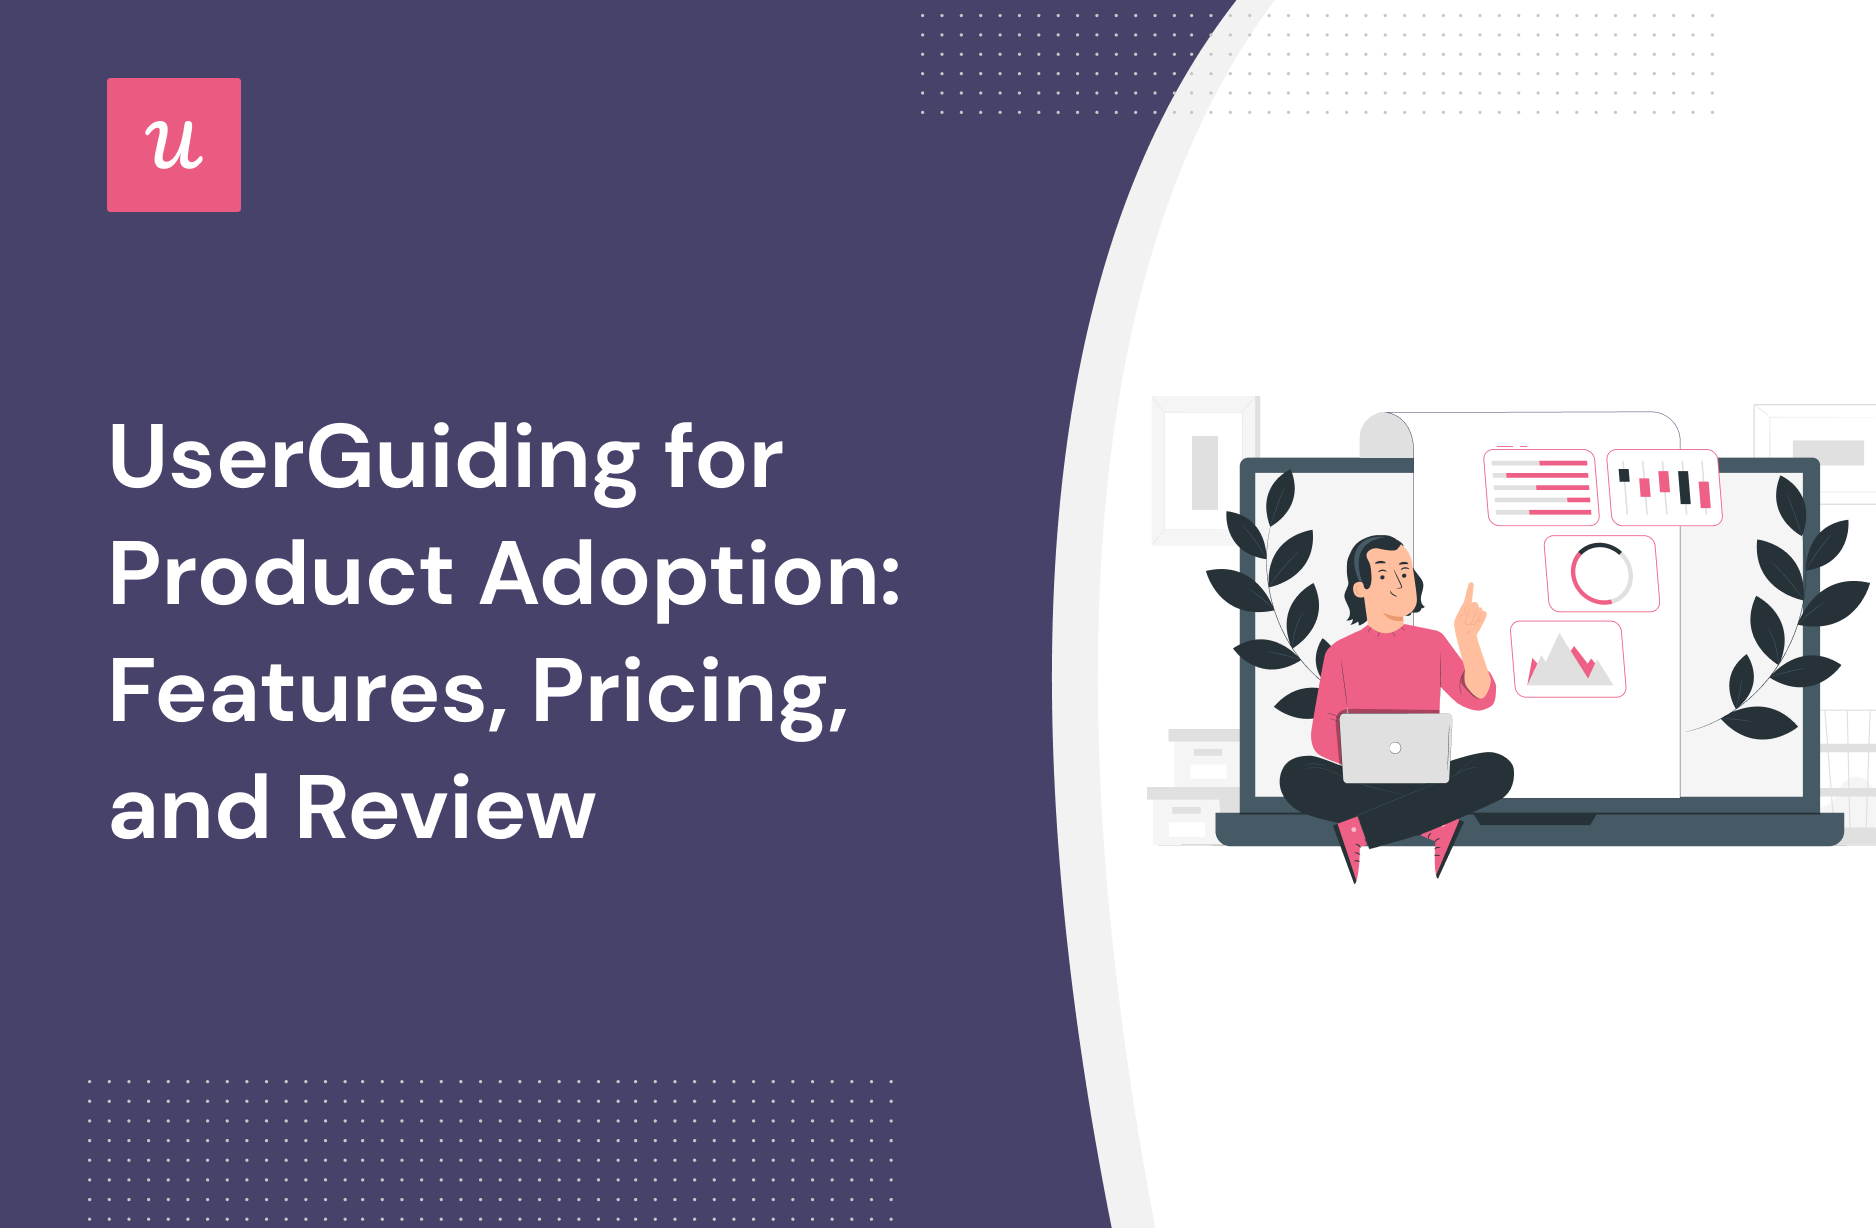 UserGuiding for Product Adoption: Features, Pricing, and Review